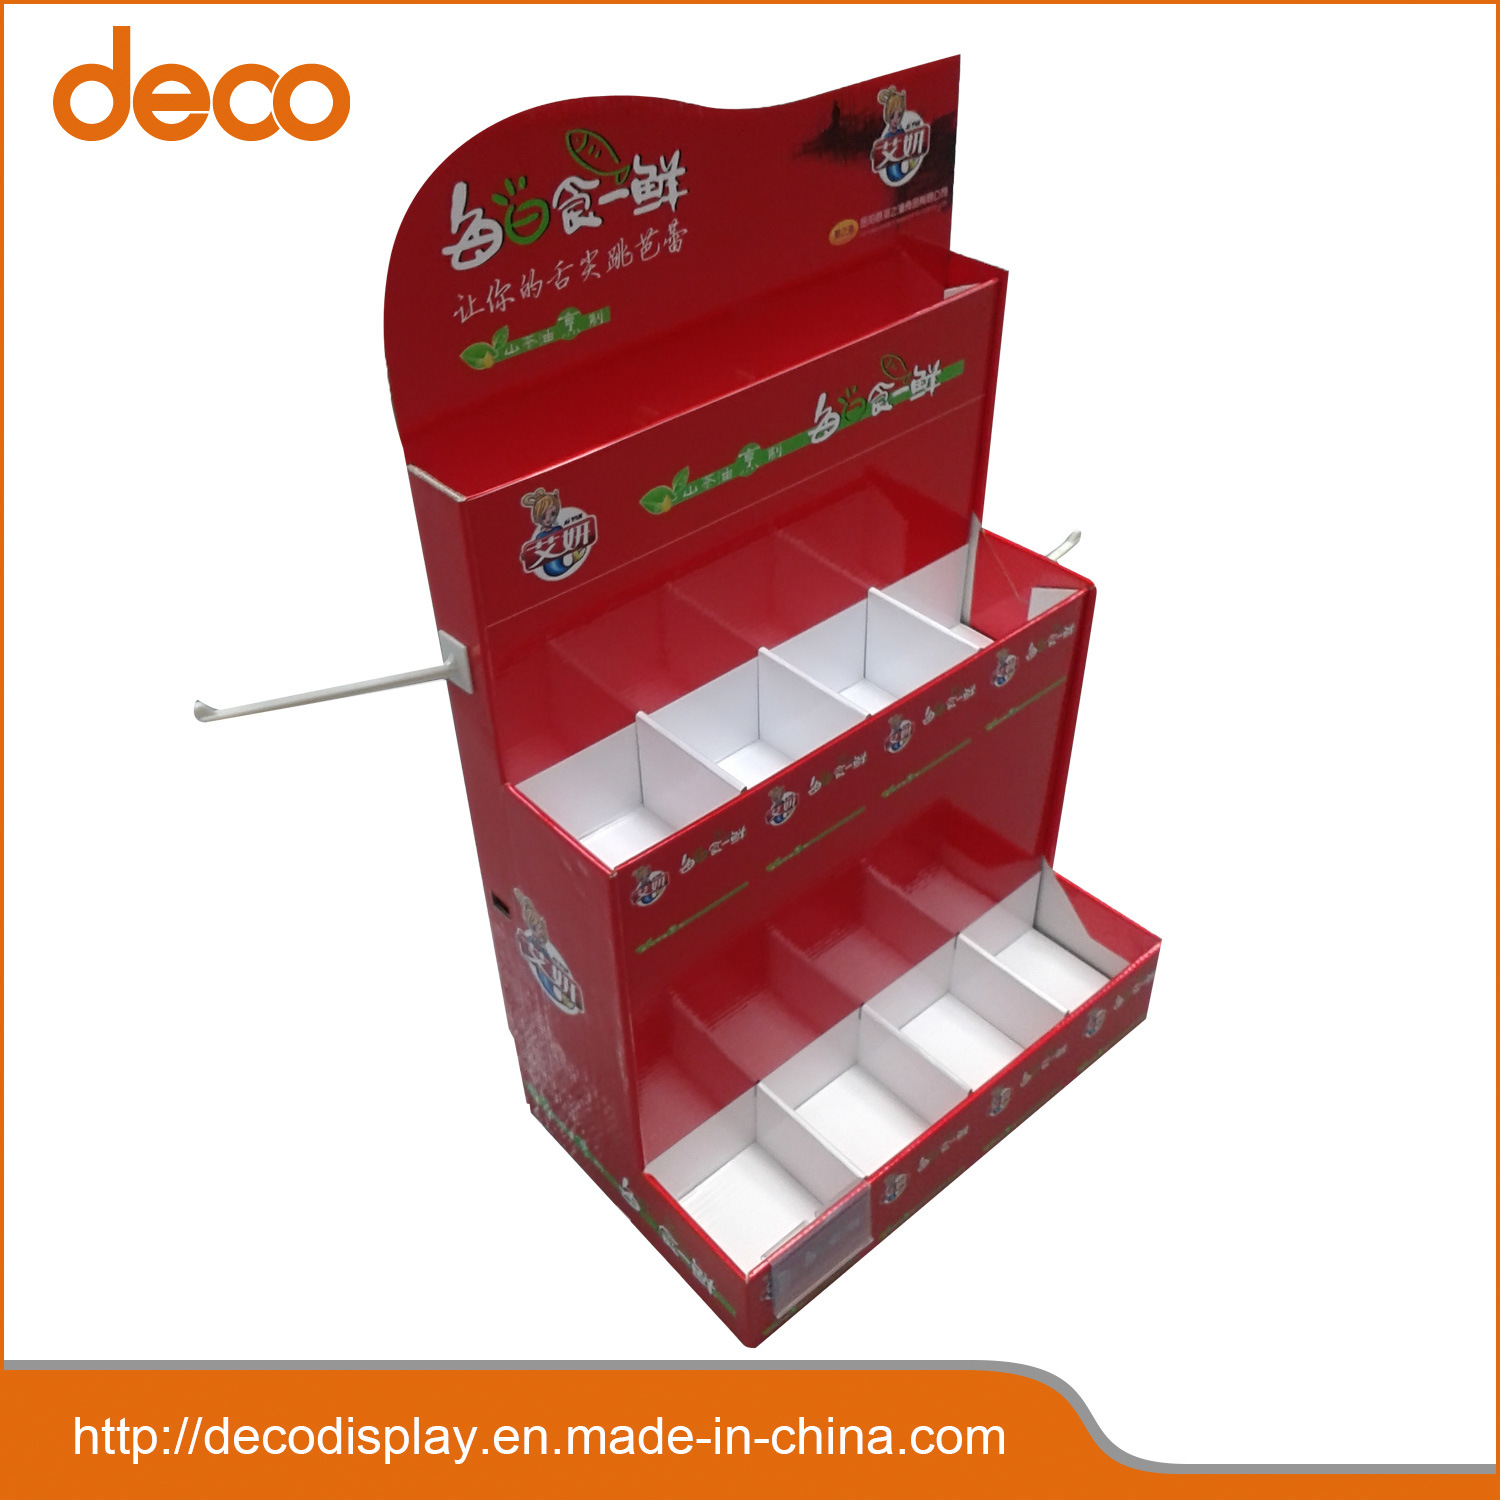 /proimages/2f0j00AQmUSyrFlkba/paper-display-counter-display-rack-with-hooks-for-retaild.jpg